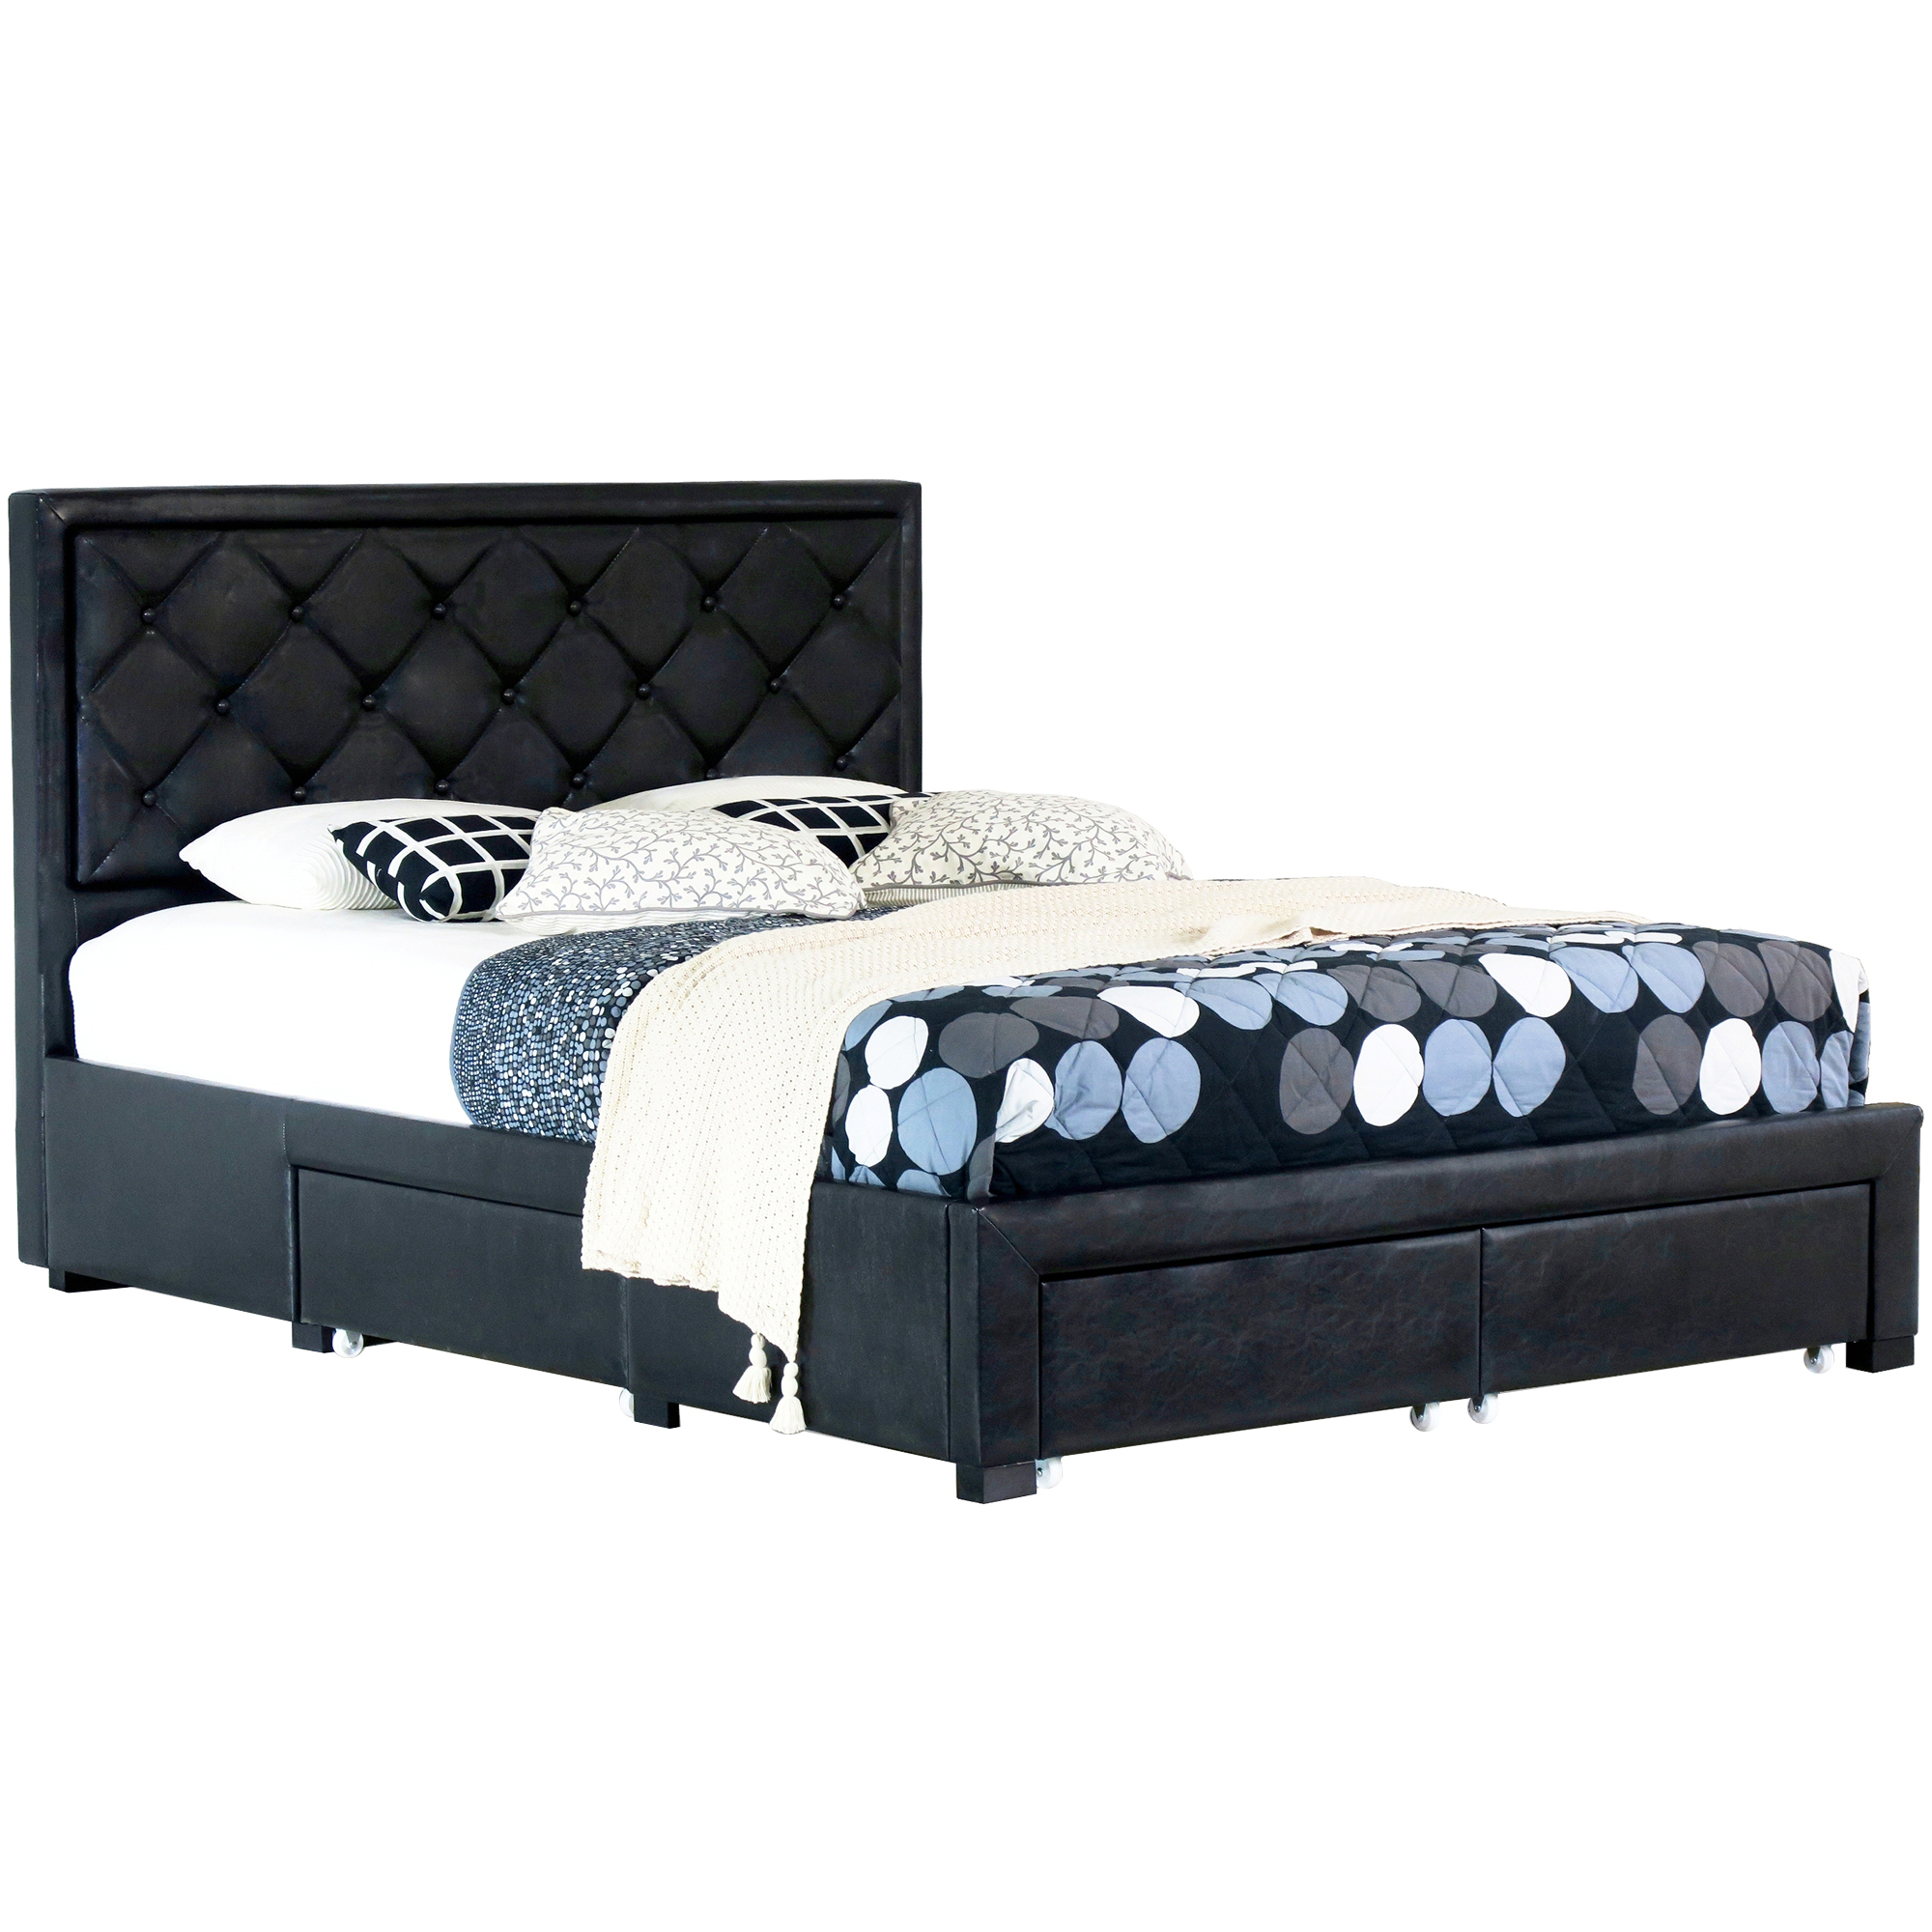 Faux Leather Bed Frame With Storage, Faux Leather Sleigh Bed With 4 Drawers